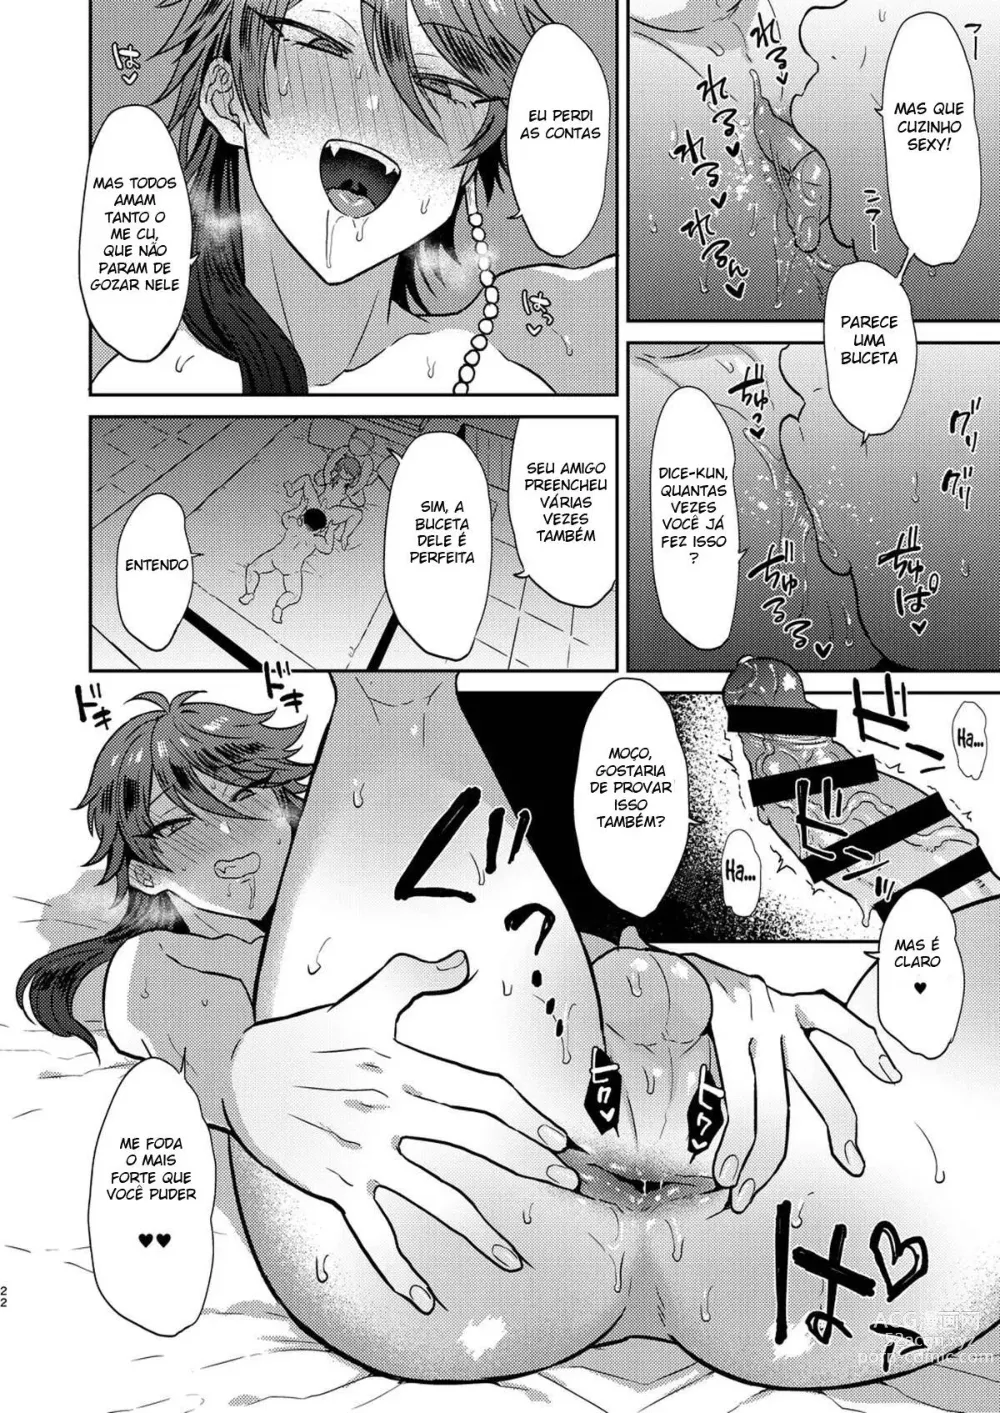 Page 21 of doujinshi GAMBLESEX My Life!